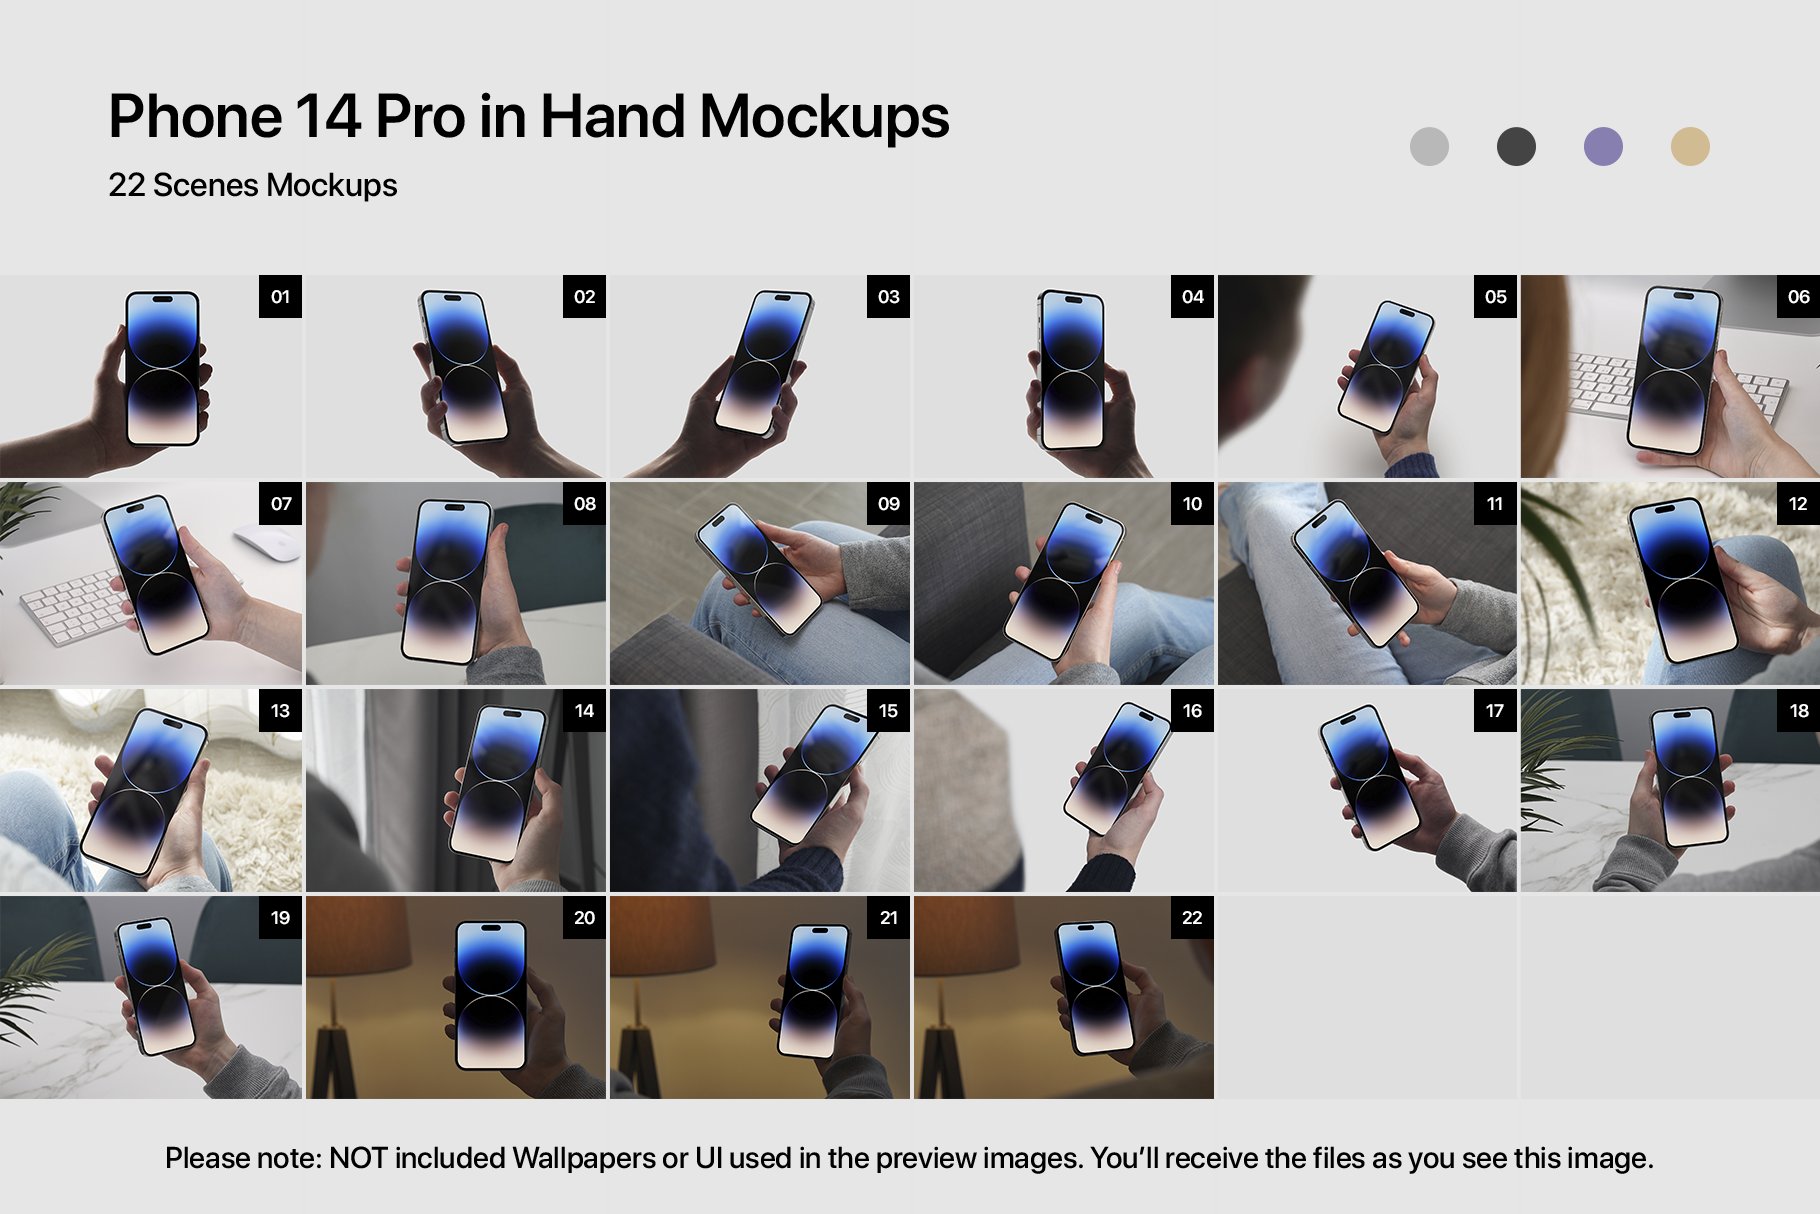 22 Phone 14 Pro In Hand Mockups preview image.